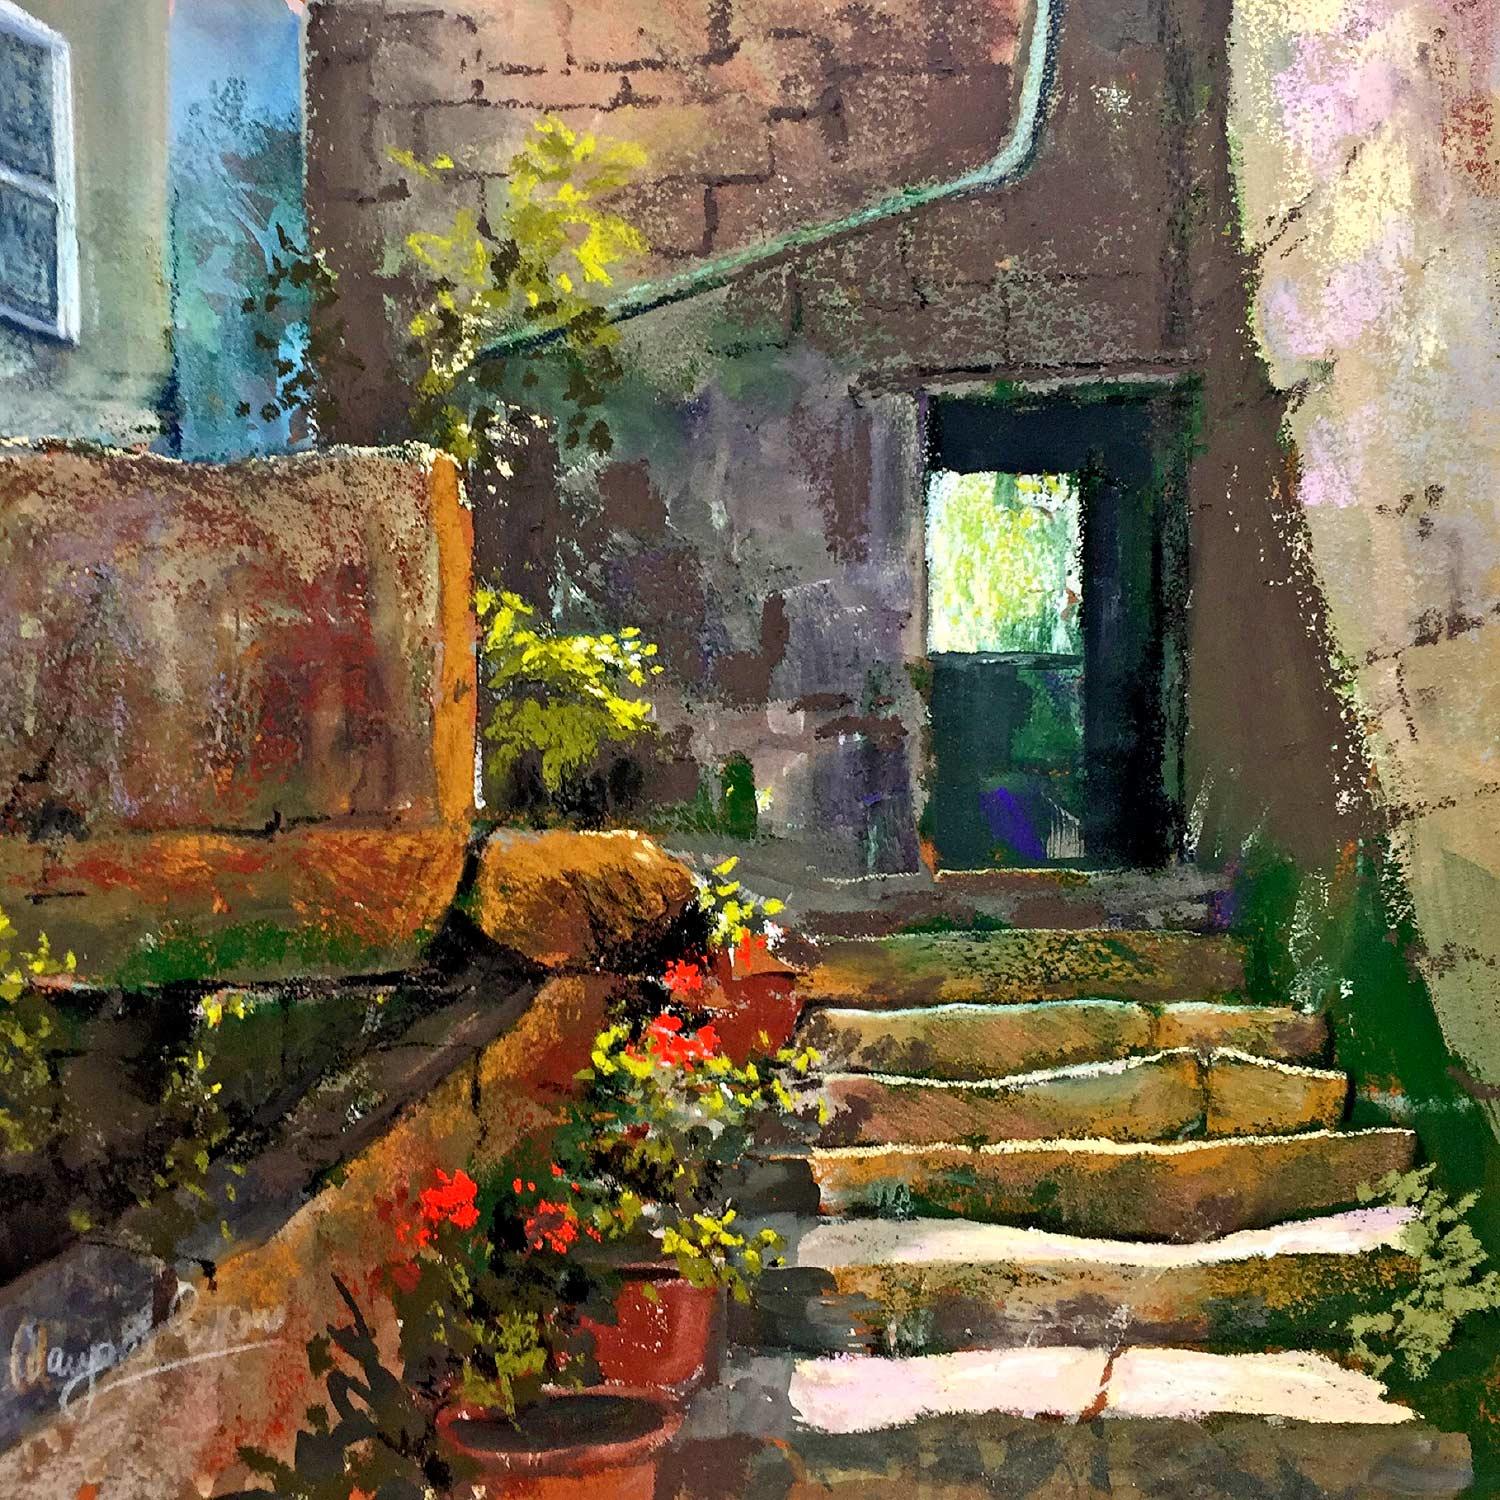 Le Vieux Couvent Stairway by Margaret Evans